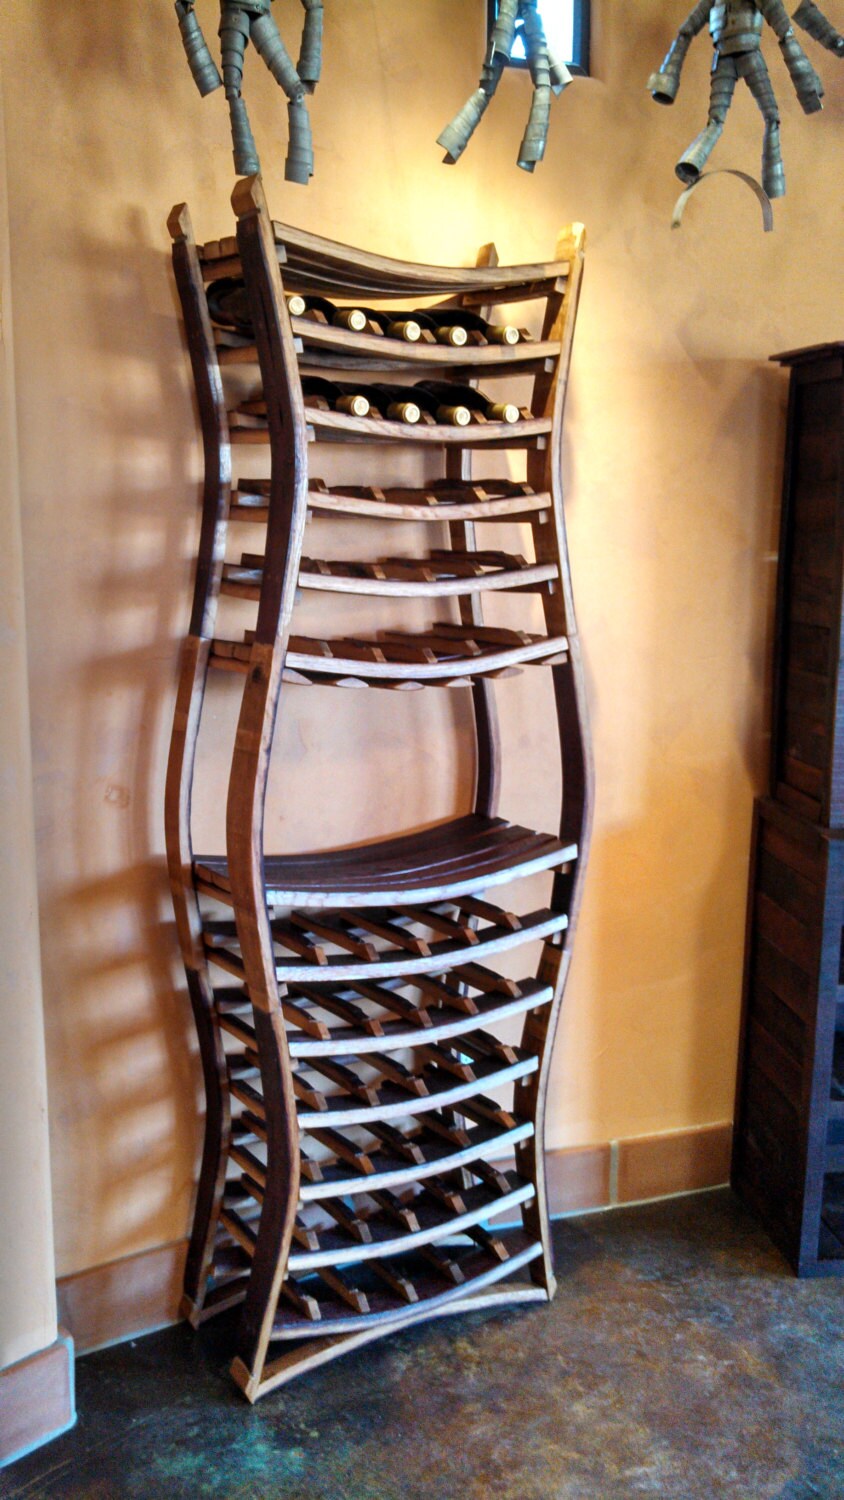 Large Wine Rack - Hour Glass - Made from retired California wine barrels. 100% Recycled!